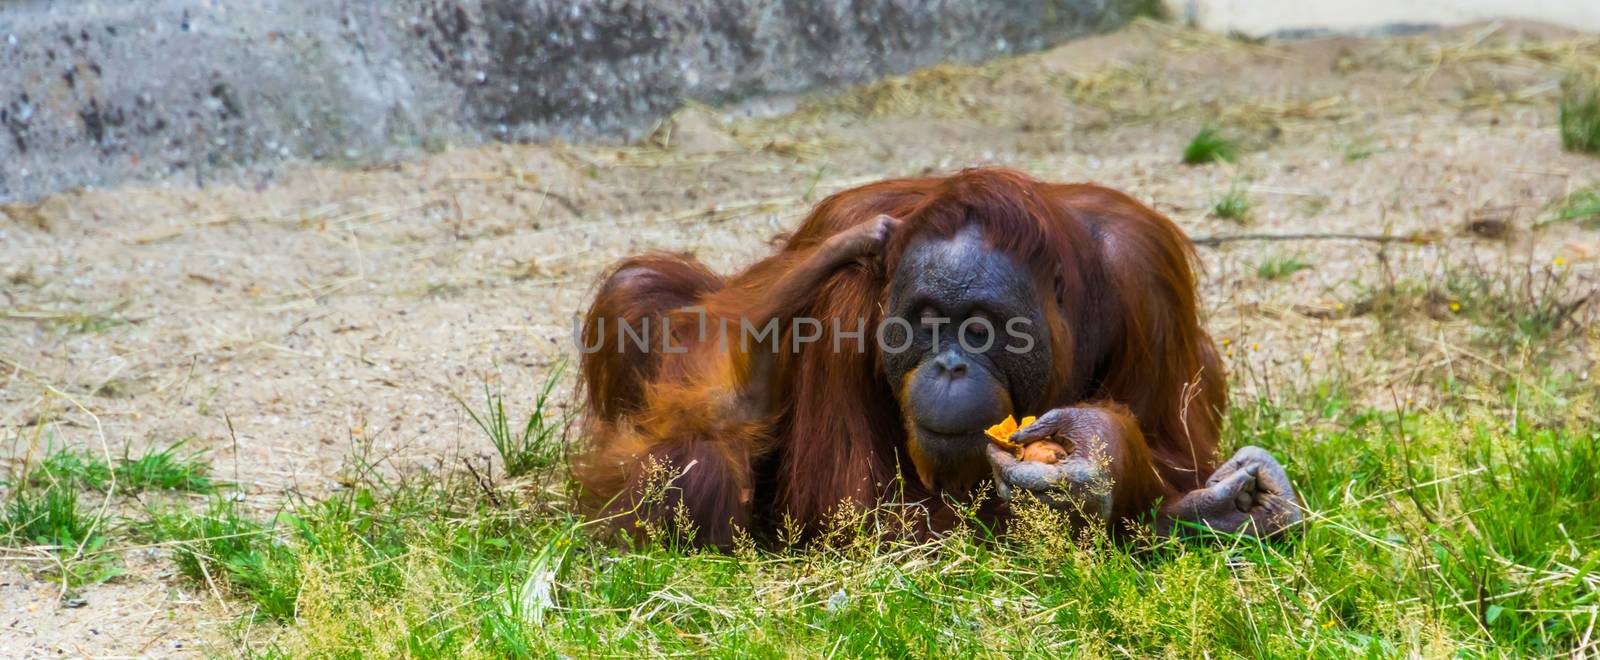 Mother bornean orangutan eating with her infant together, critically endangered animal specie from Indonesia by charlottebleijenberg